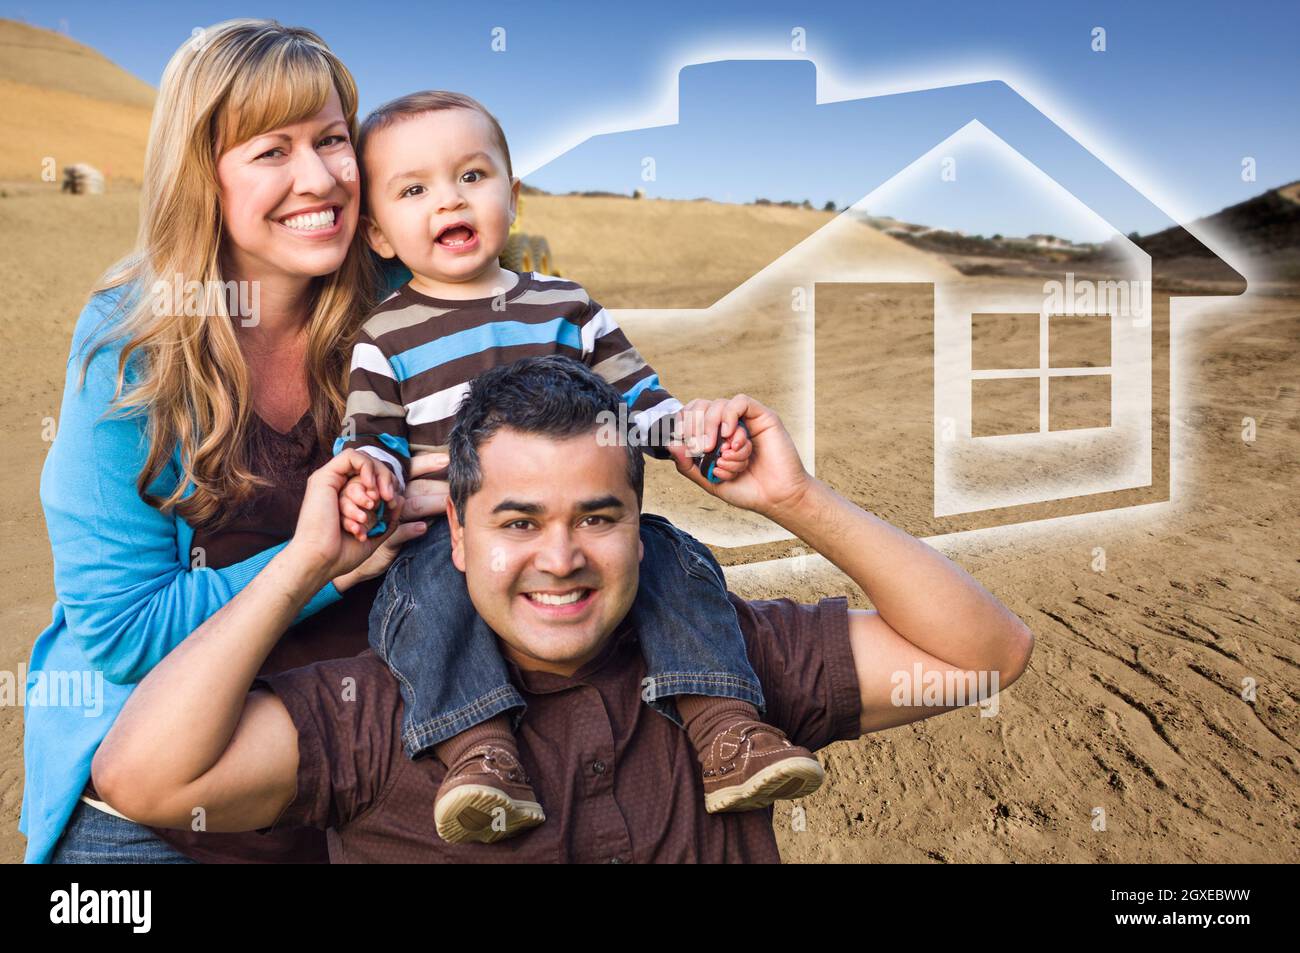 Happy Hopeful Mixed Race Family at Construction Site with Ghosted House Behind. Stock Photo